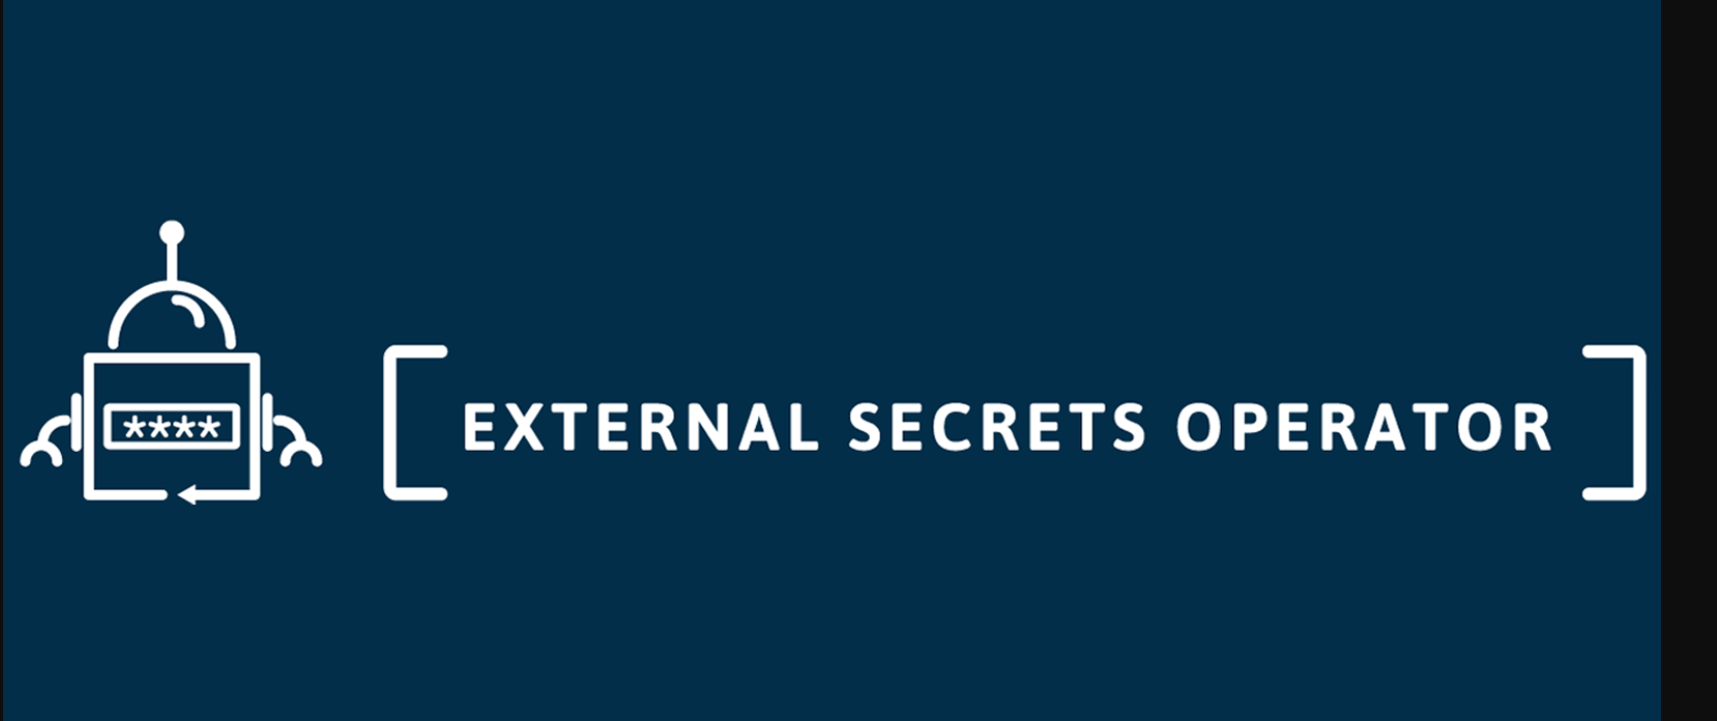 Secret's Solutions/Consulting